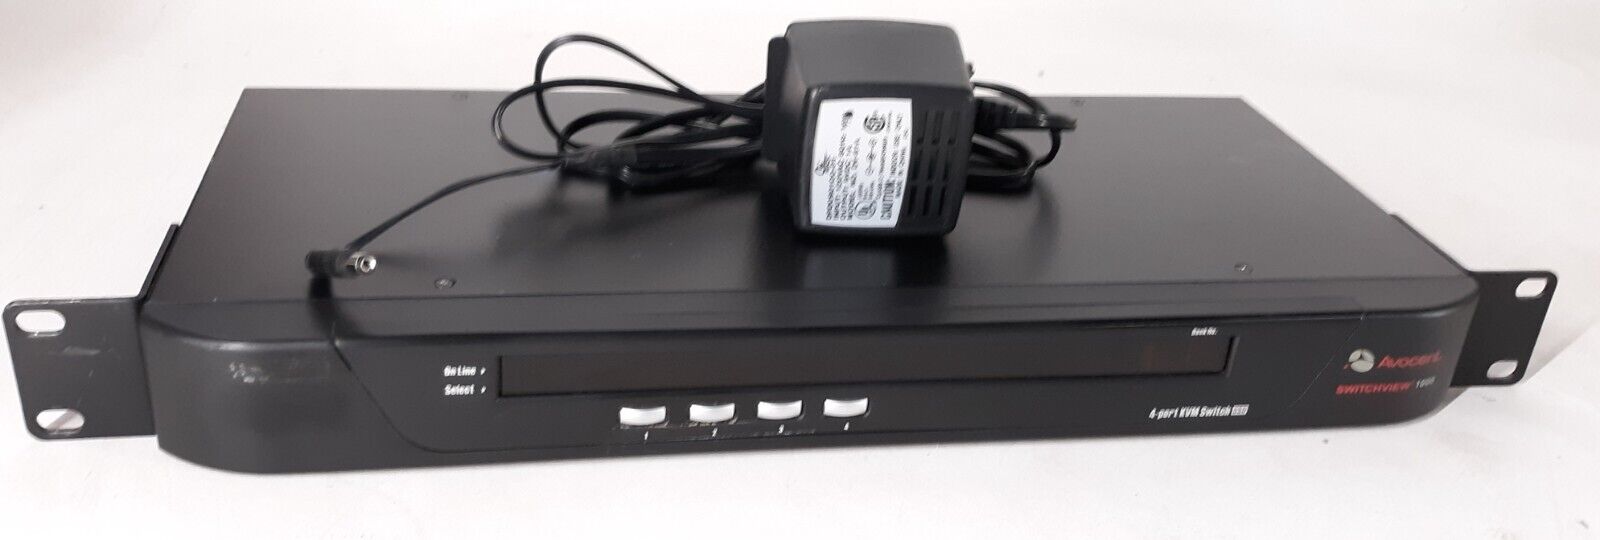 Avocent Switchview 1000 4-Port KVM Switch w/ AC Adapter *TESTED*